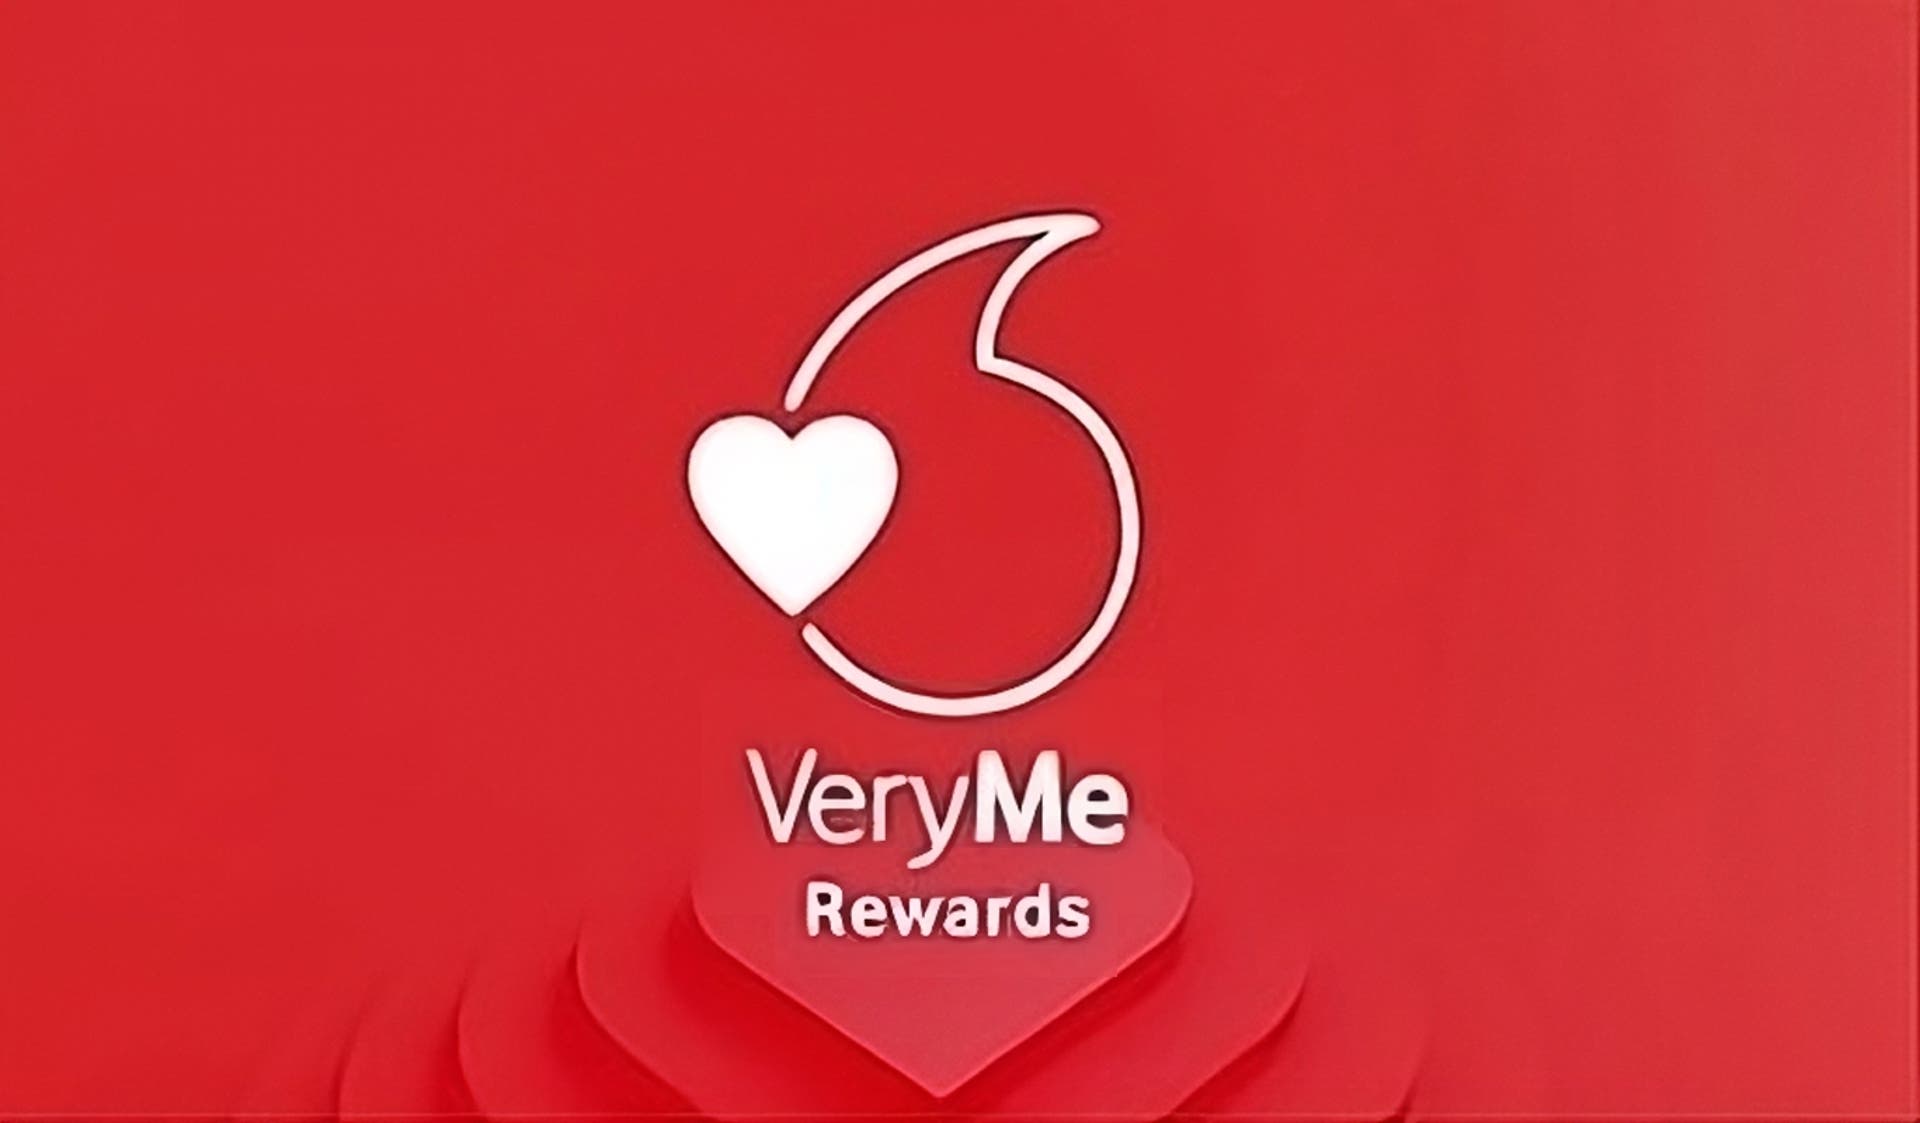  The Vodafone Logo with text that reads "VeryMe Rewards" 